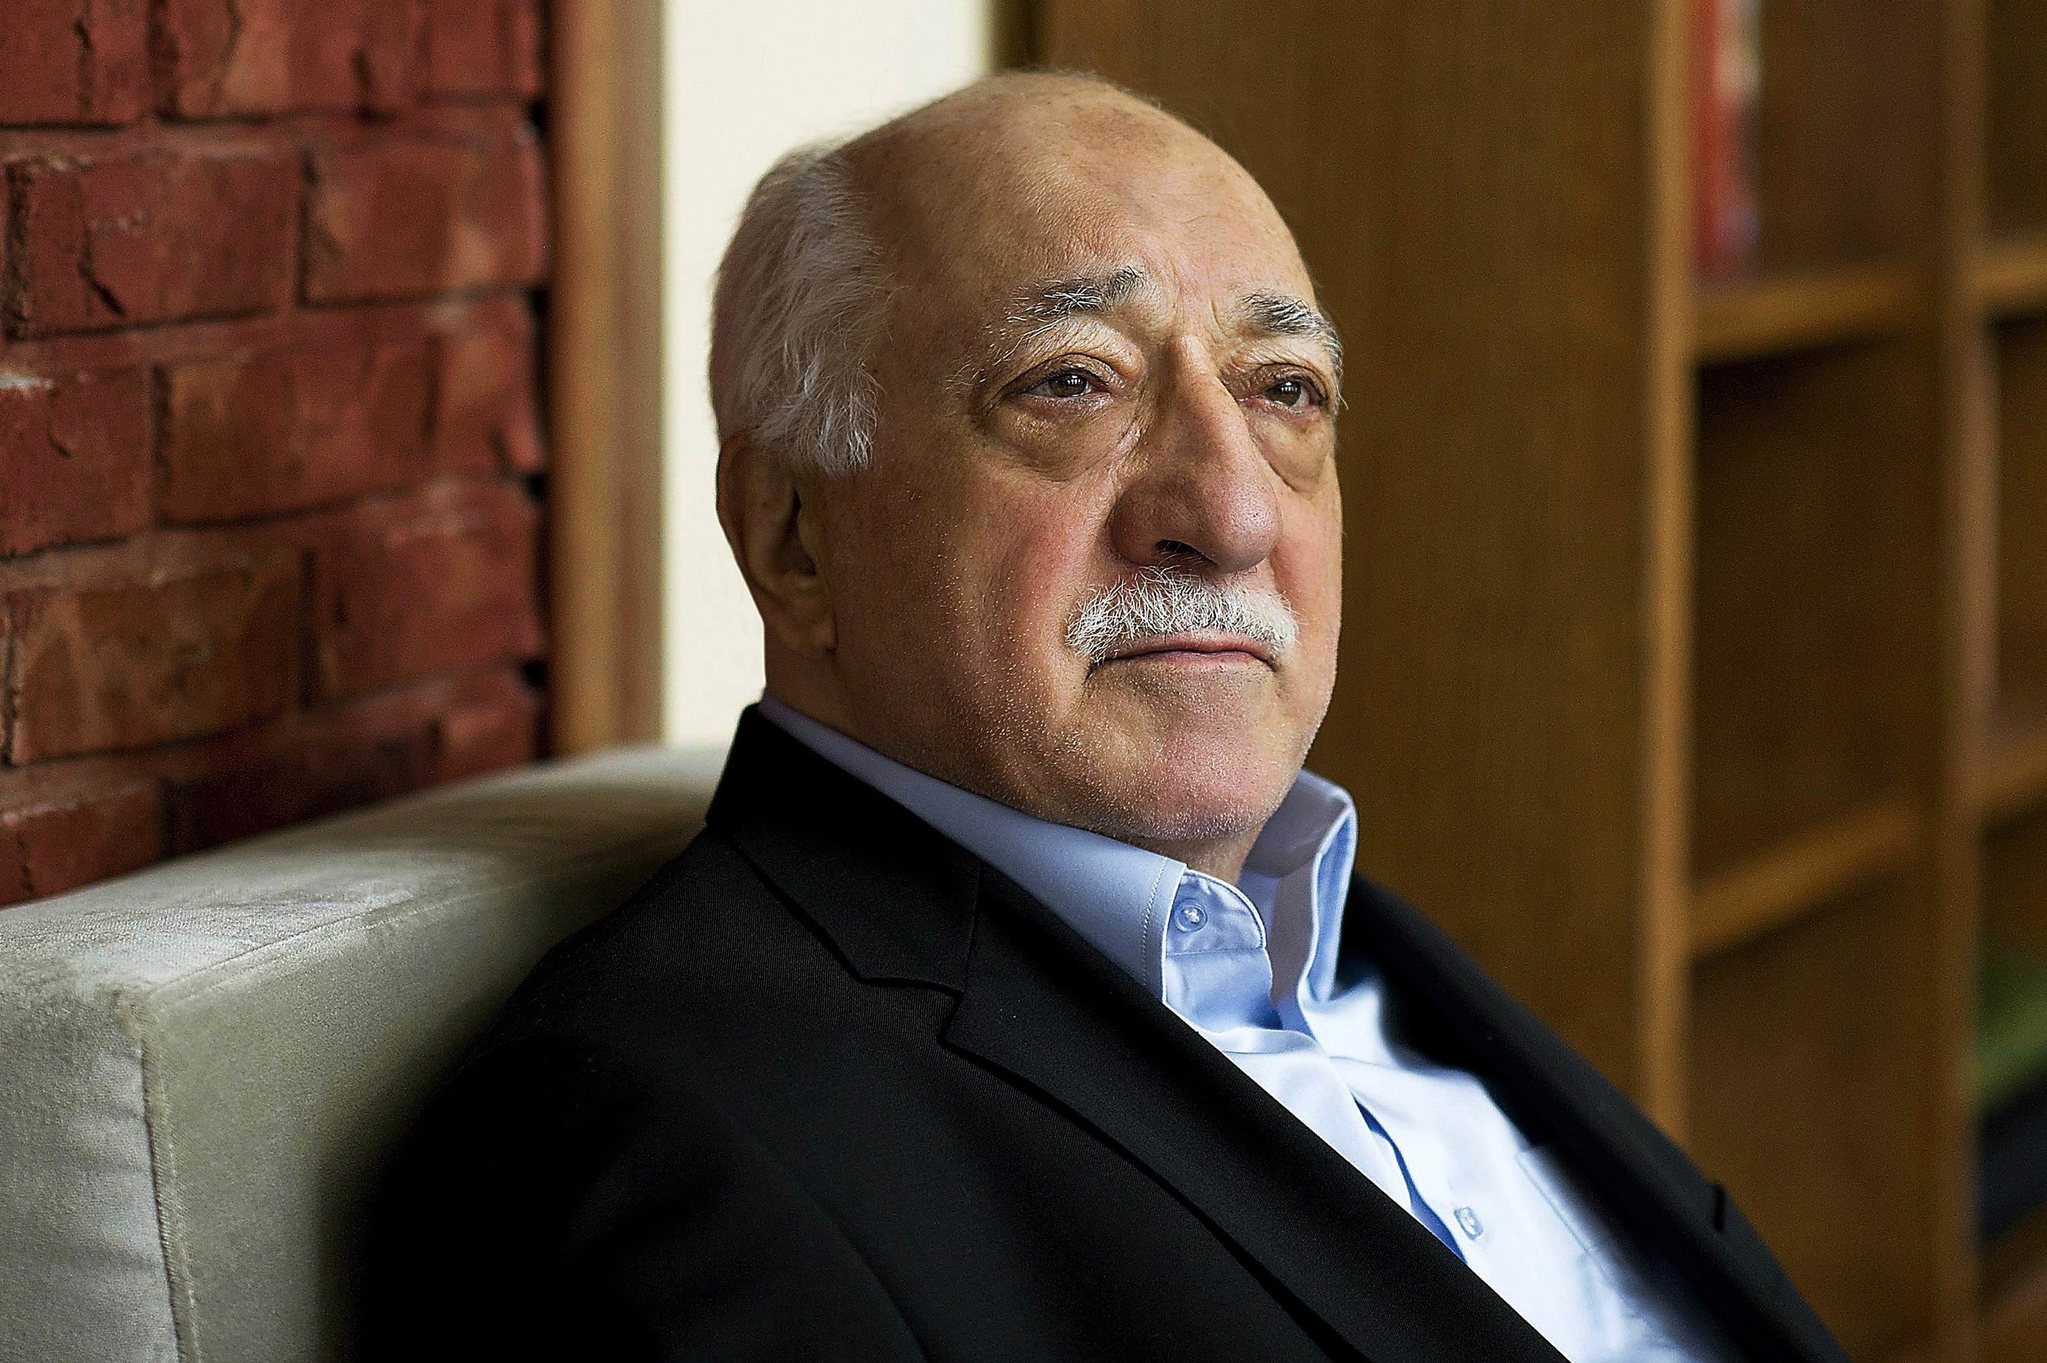 In this March 15, 2014, file photo, Fethullah Gu00fclen is pictured at his residence in Saylorsburg, Pa. (AP Photo)